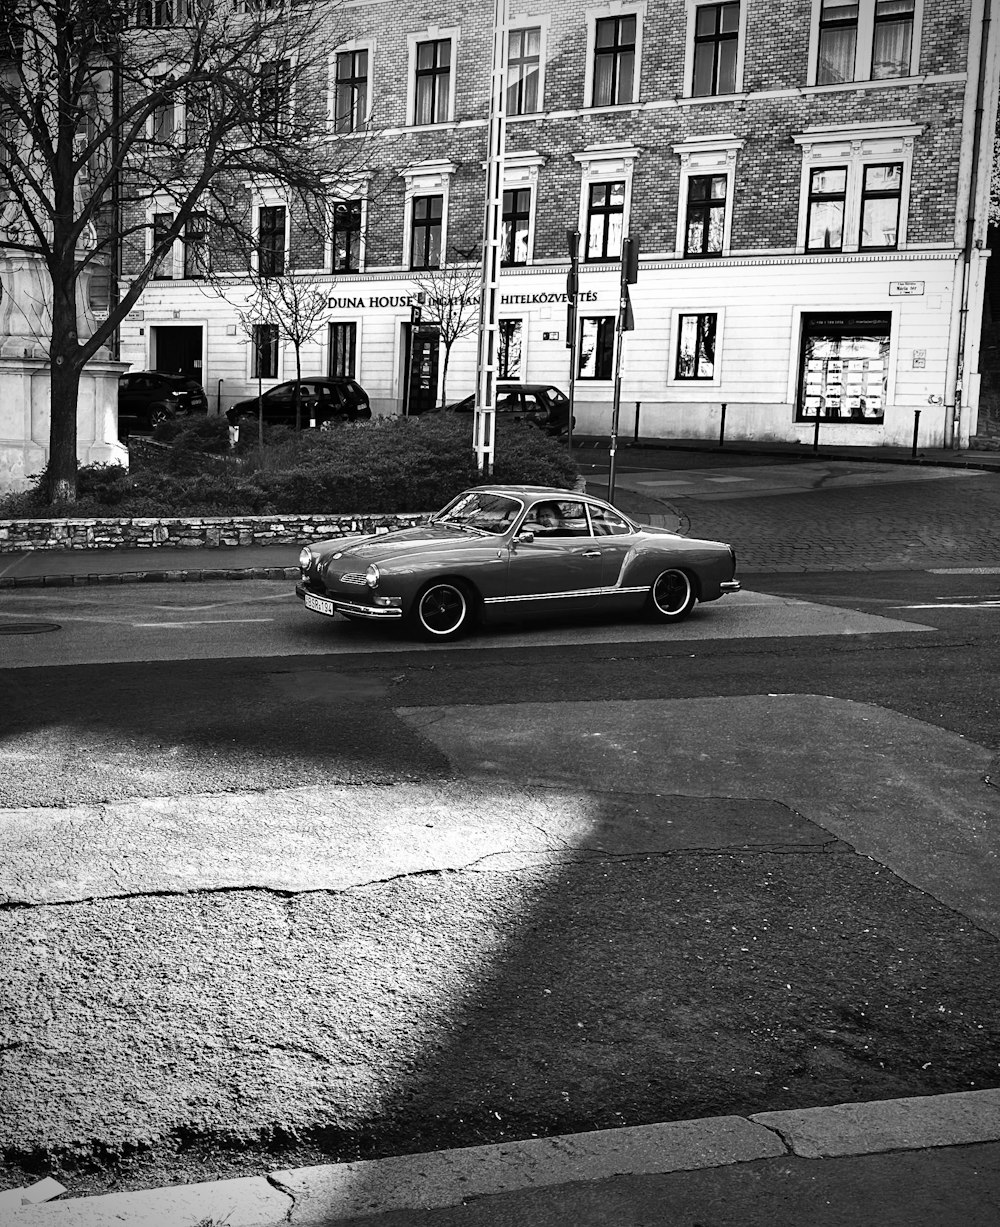 a black and white photo of a car on a street